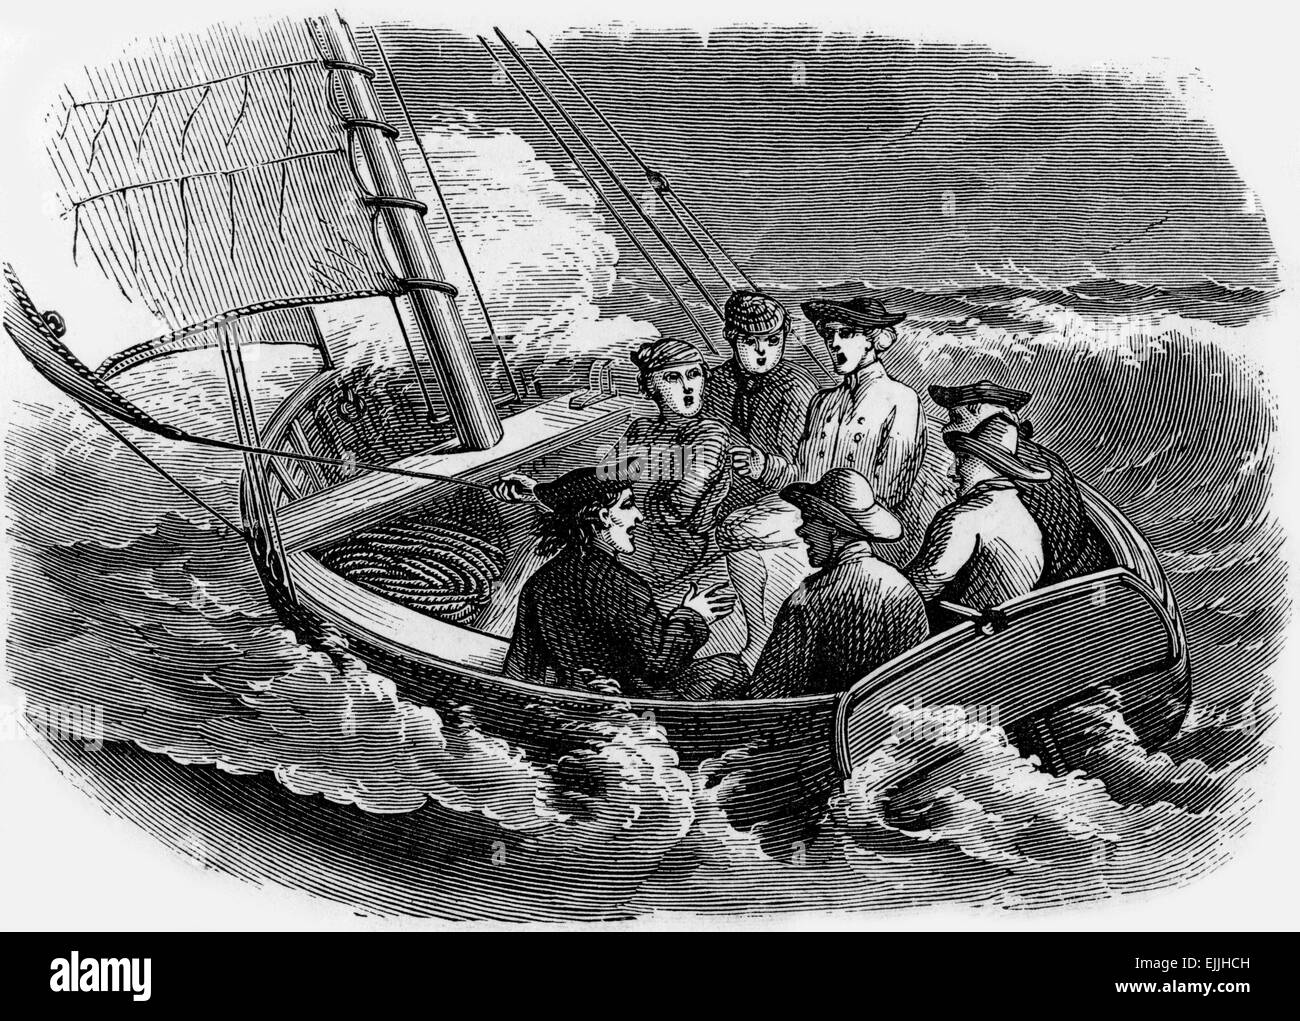 Men pray for safety caught in a sailing boat in rough seas, engraving from Selections from the Journal of John Wesley, 1891 Stock Photo